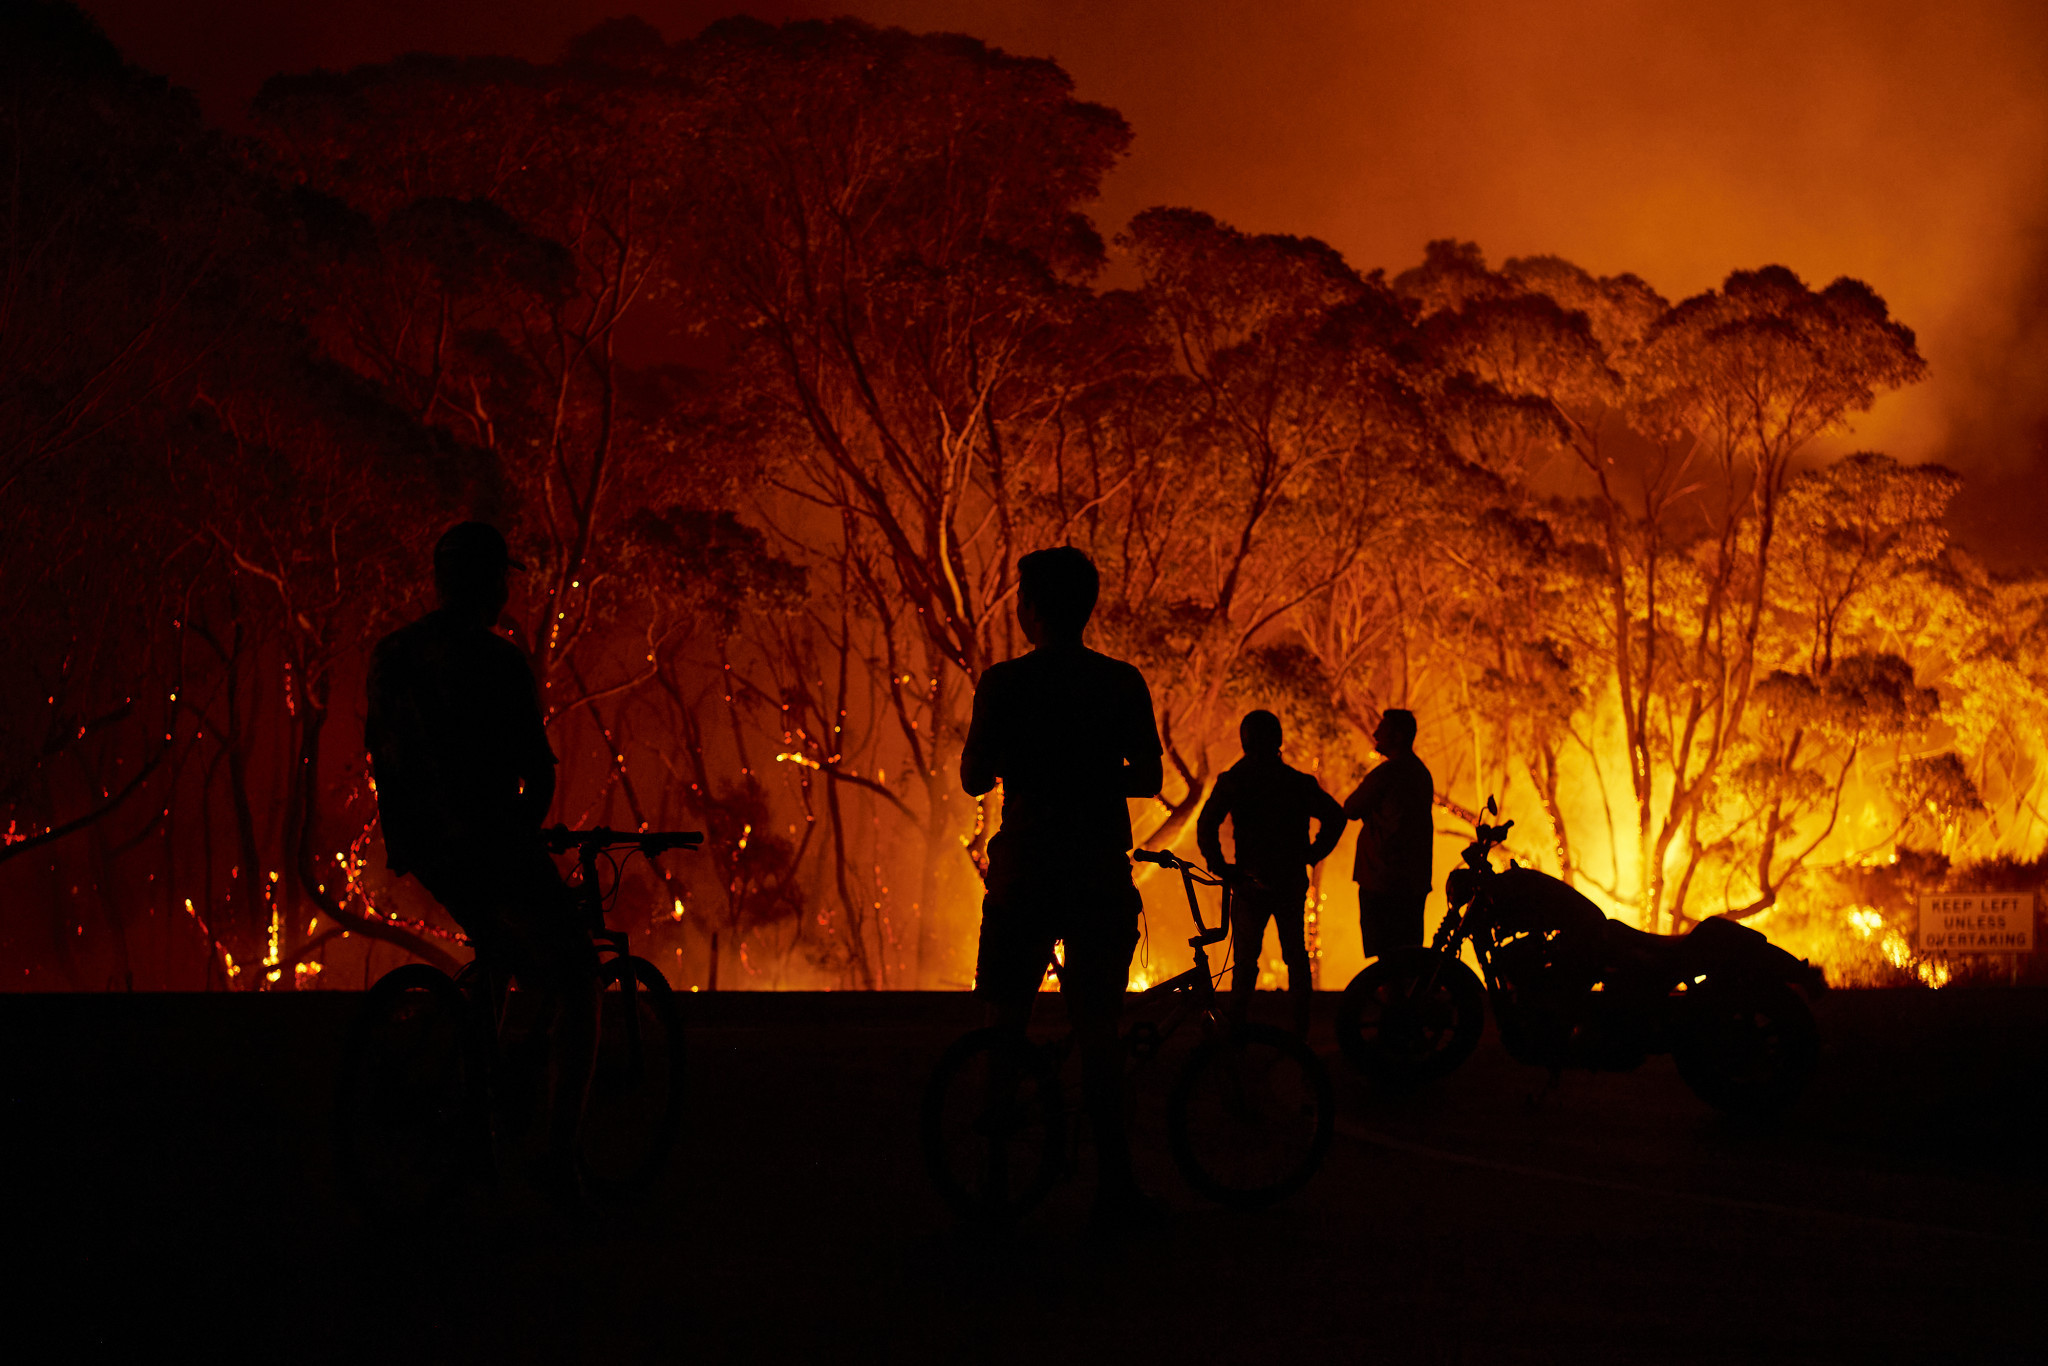 Bushfires have been particularly severe in Sydney's state of New South Wales ©Getty Images